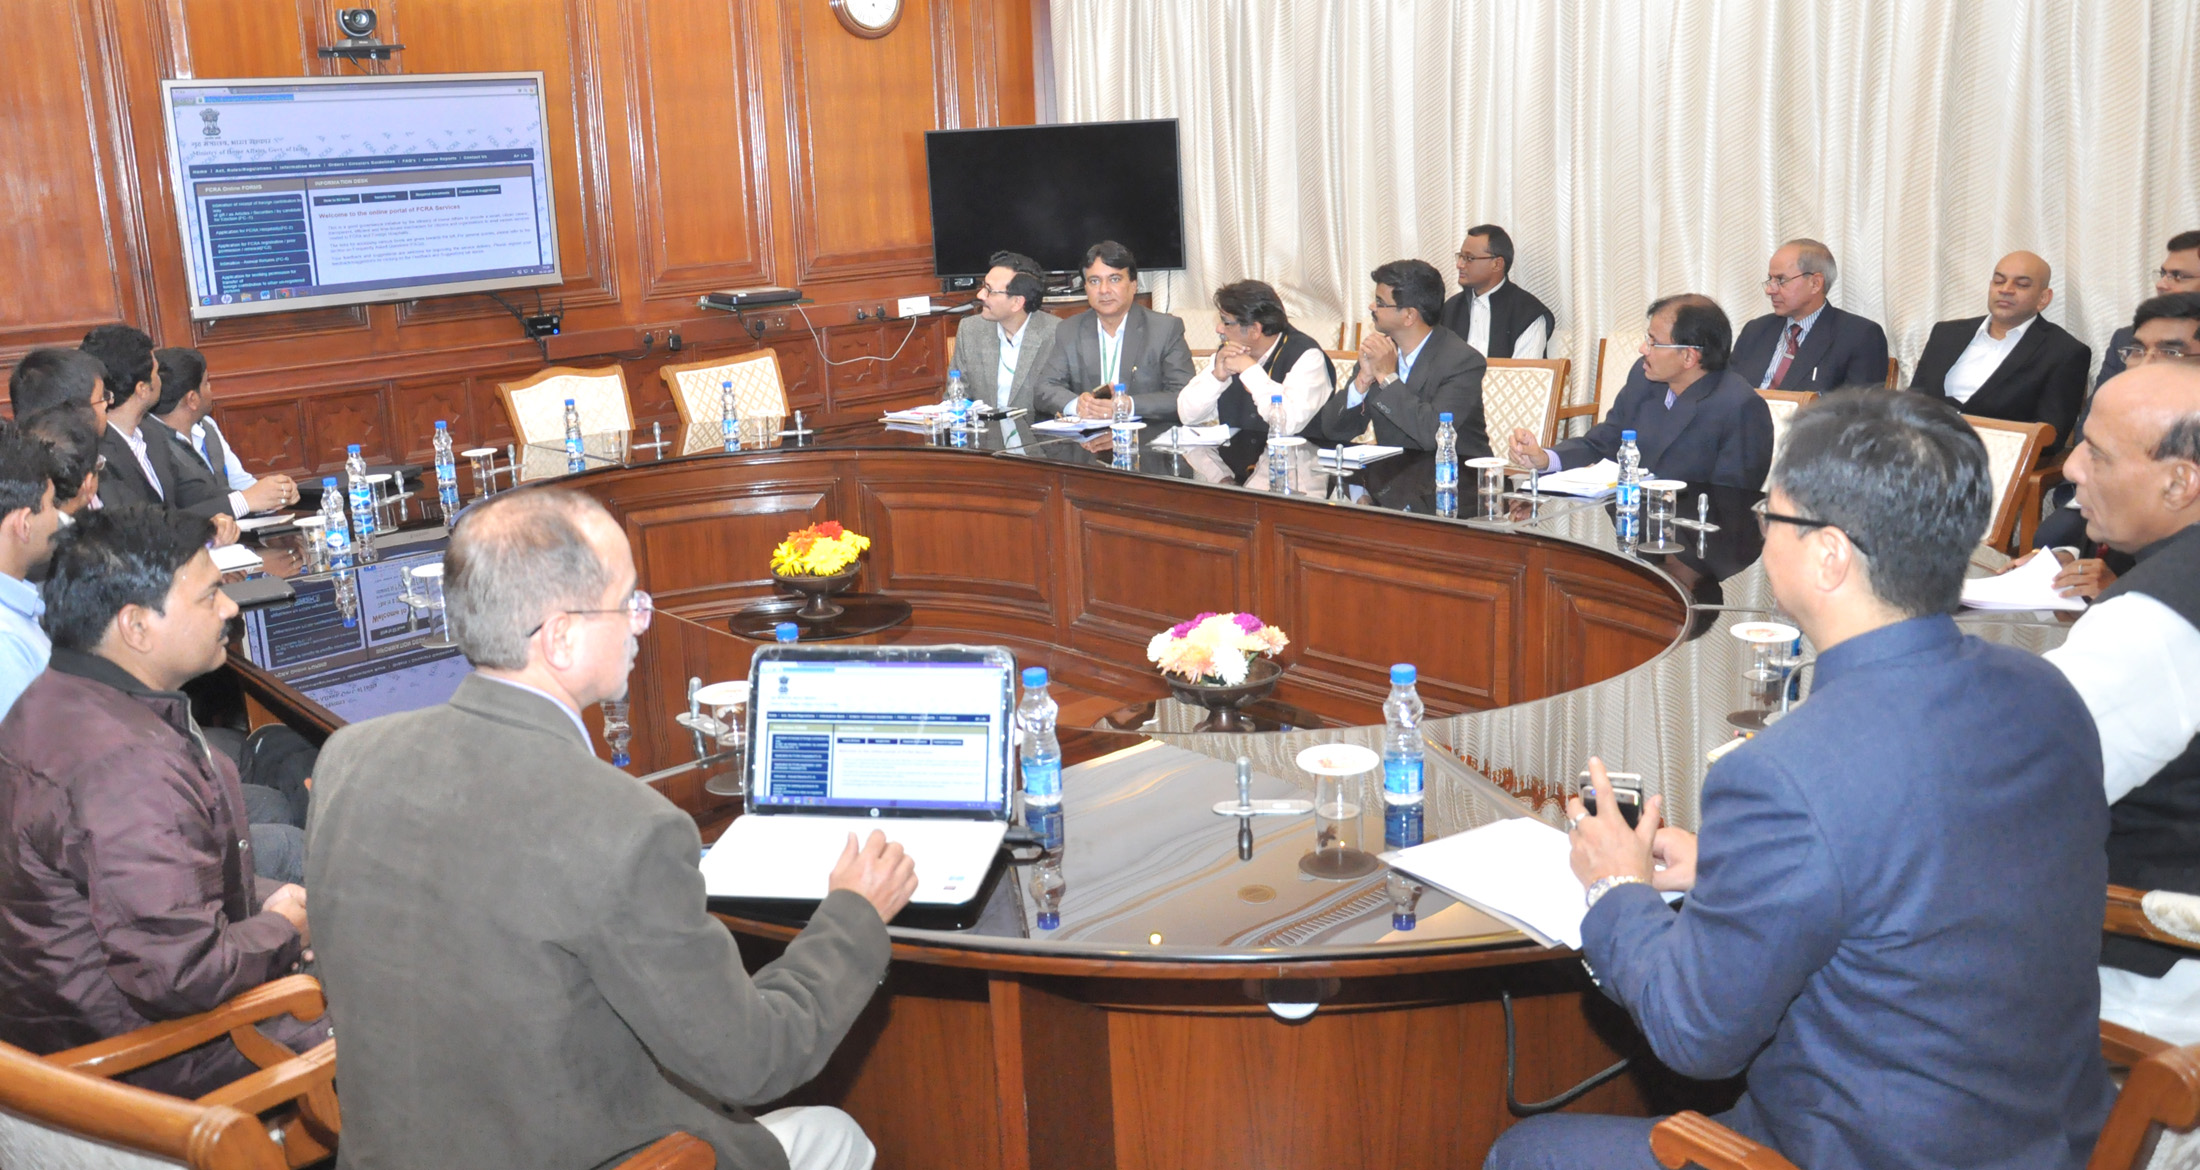 The Union Home Minister, Shri Rajnath Singh launching the revamped website of the Ministry of Home Affairs on Foreign Contribution (Regulation) Act services, in New Delhi on December 14, 2015. 	The Minister of State for Home Affairs, Shri Kiren Rijiju and Senior Officers of MHA are also seen.